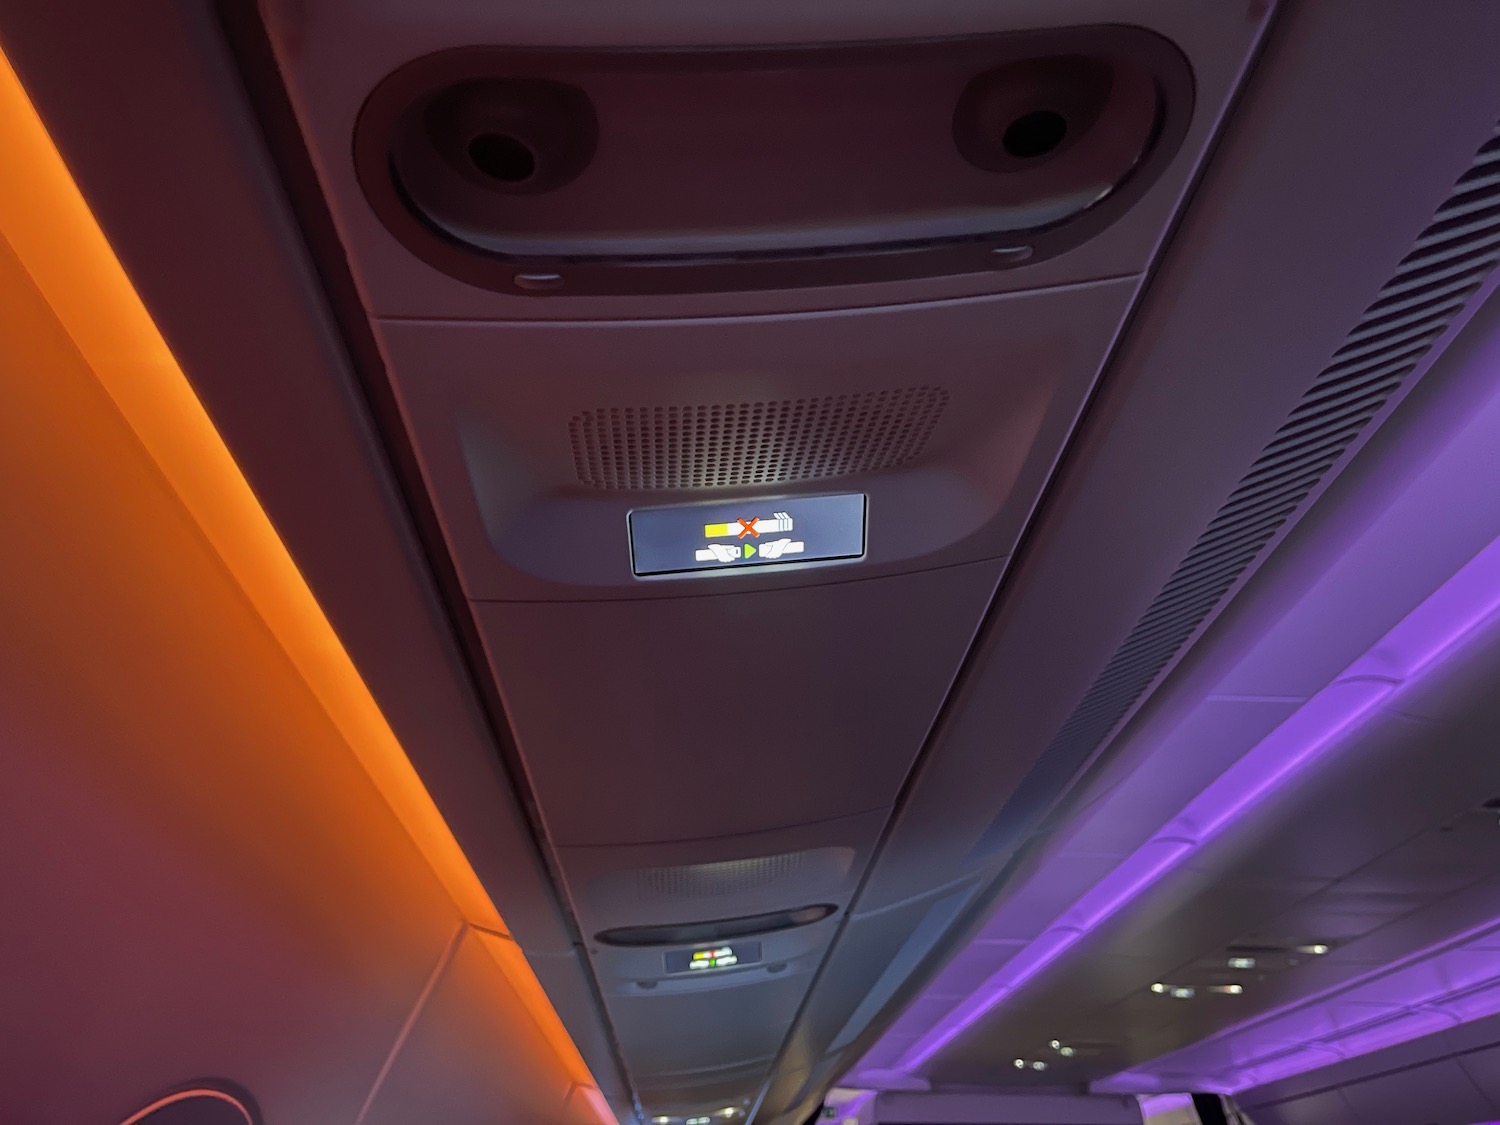 a sign on the ceiling of a plane